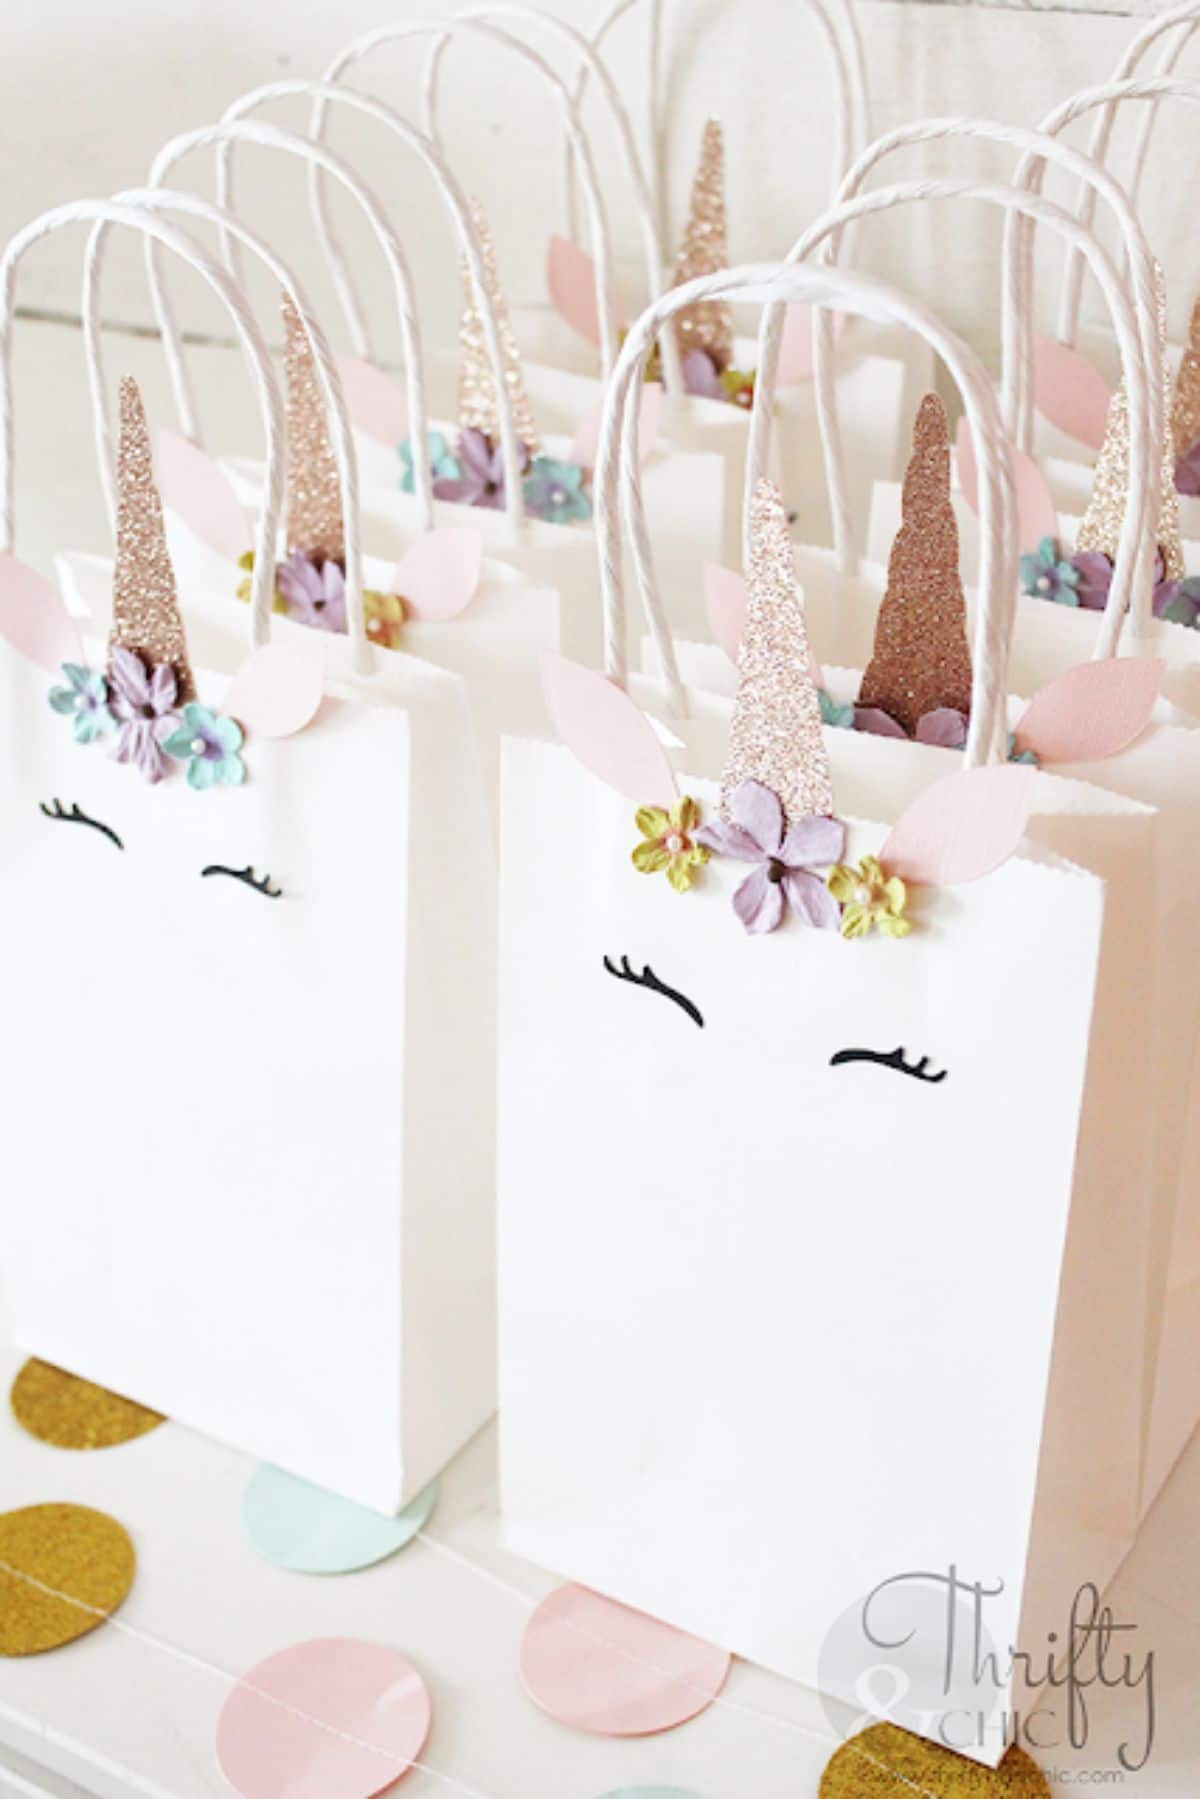 8 lined up white paper bags with unicorn designs on them